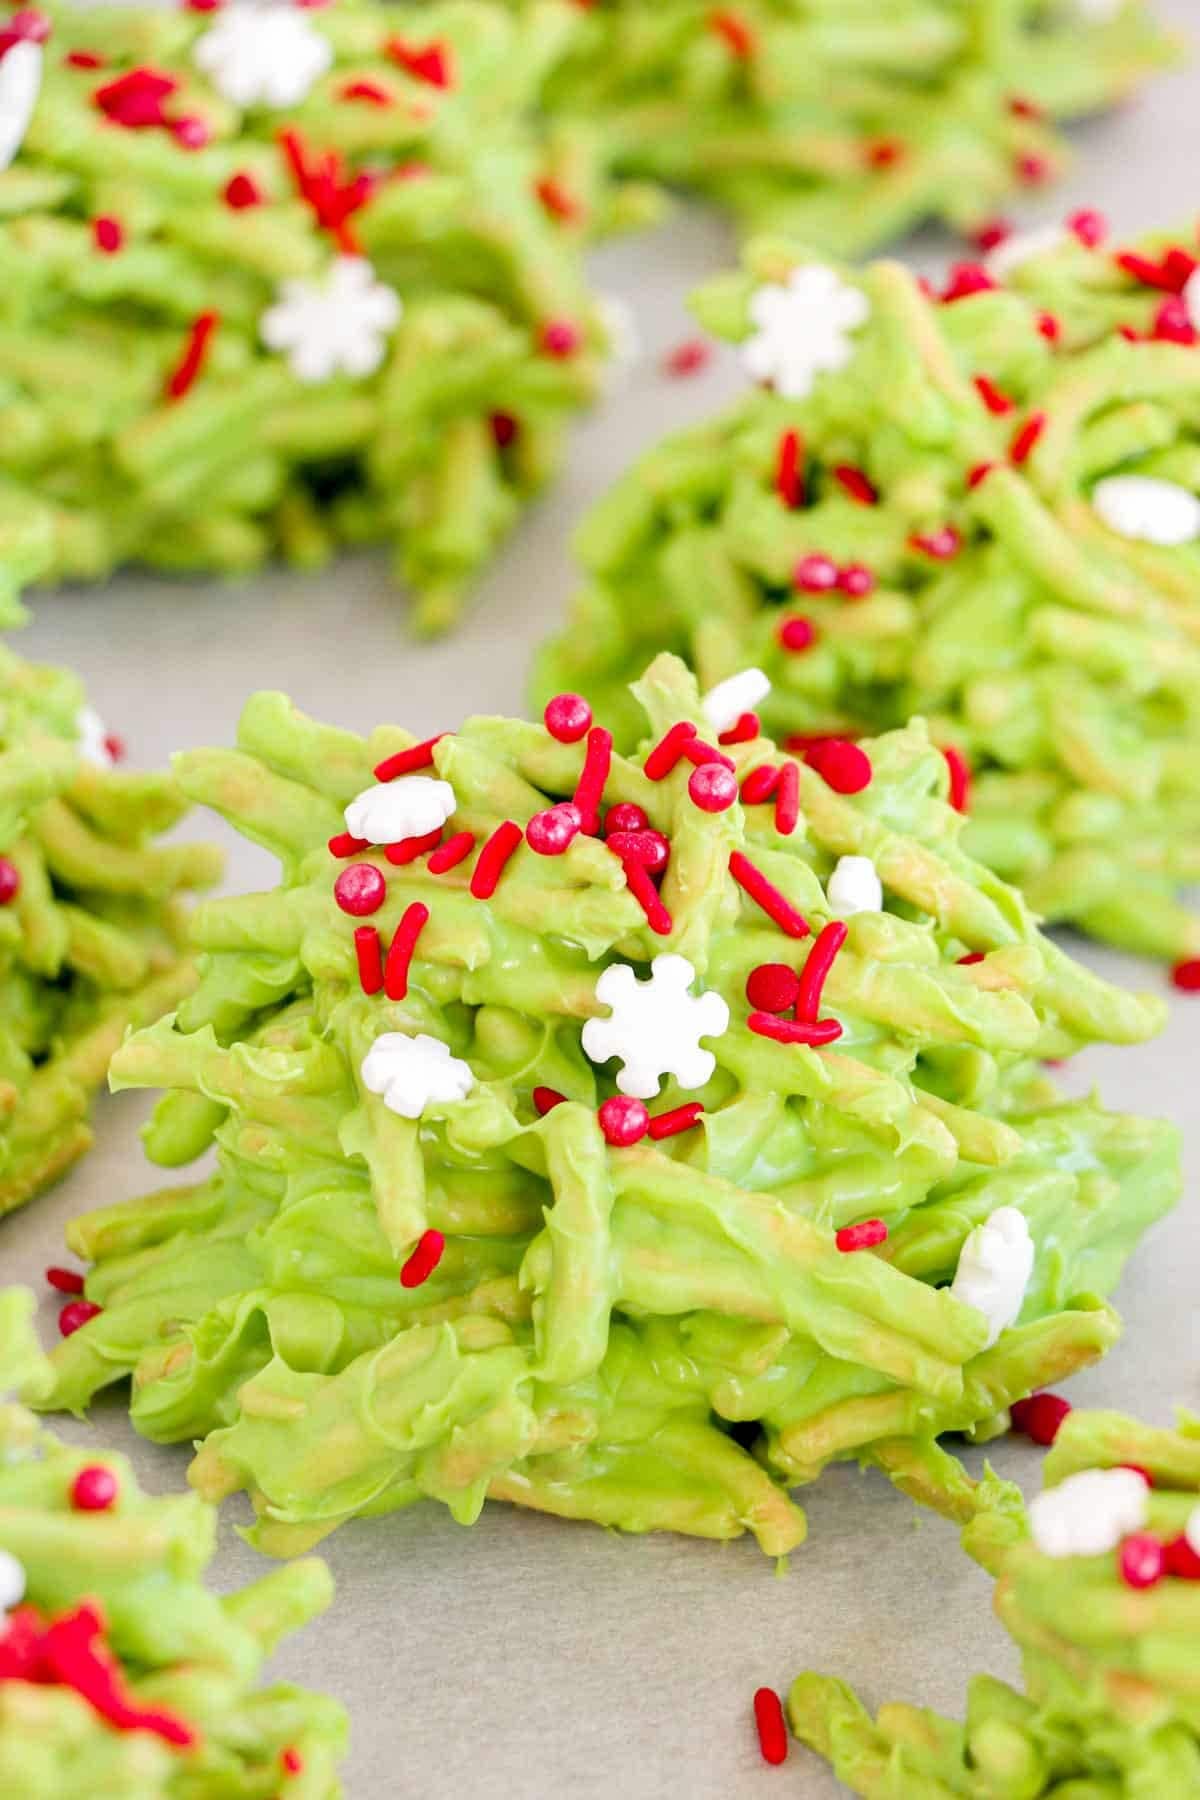 Green colored haystack cookies garnished with red and white sprinkles.